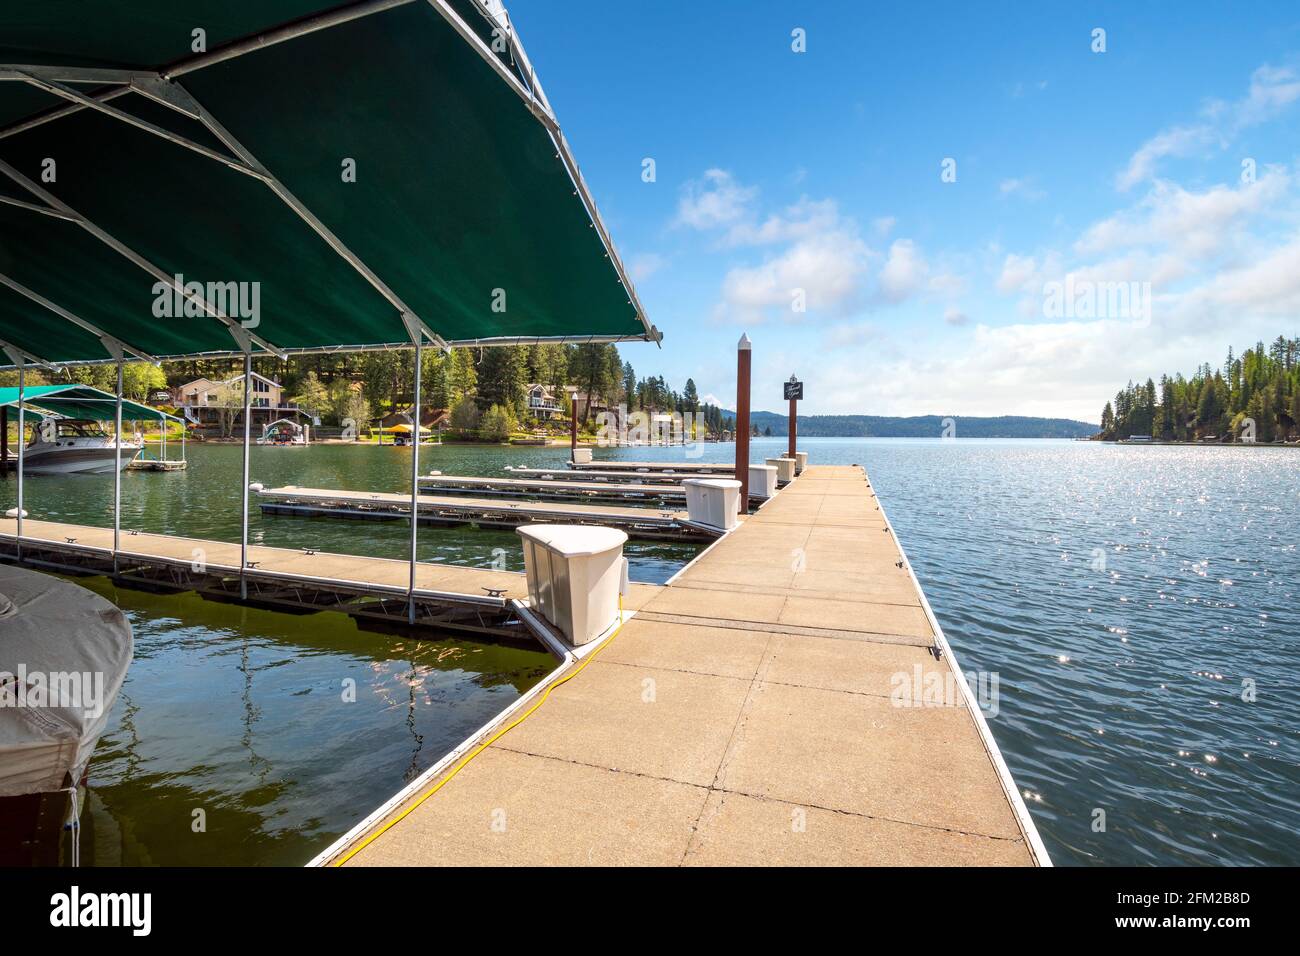 A boardwalk with boat slips at the Rockford Bay marina, with waterfront homes in the distance in Coeur d'Alene, Idaho, USA Stock Photo